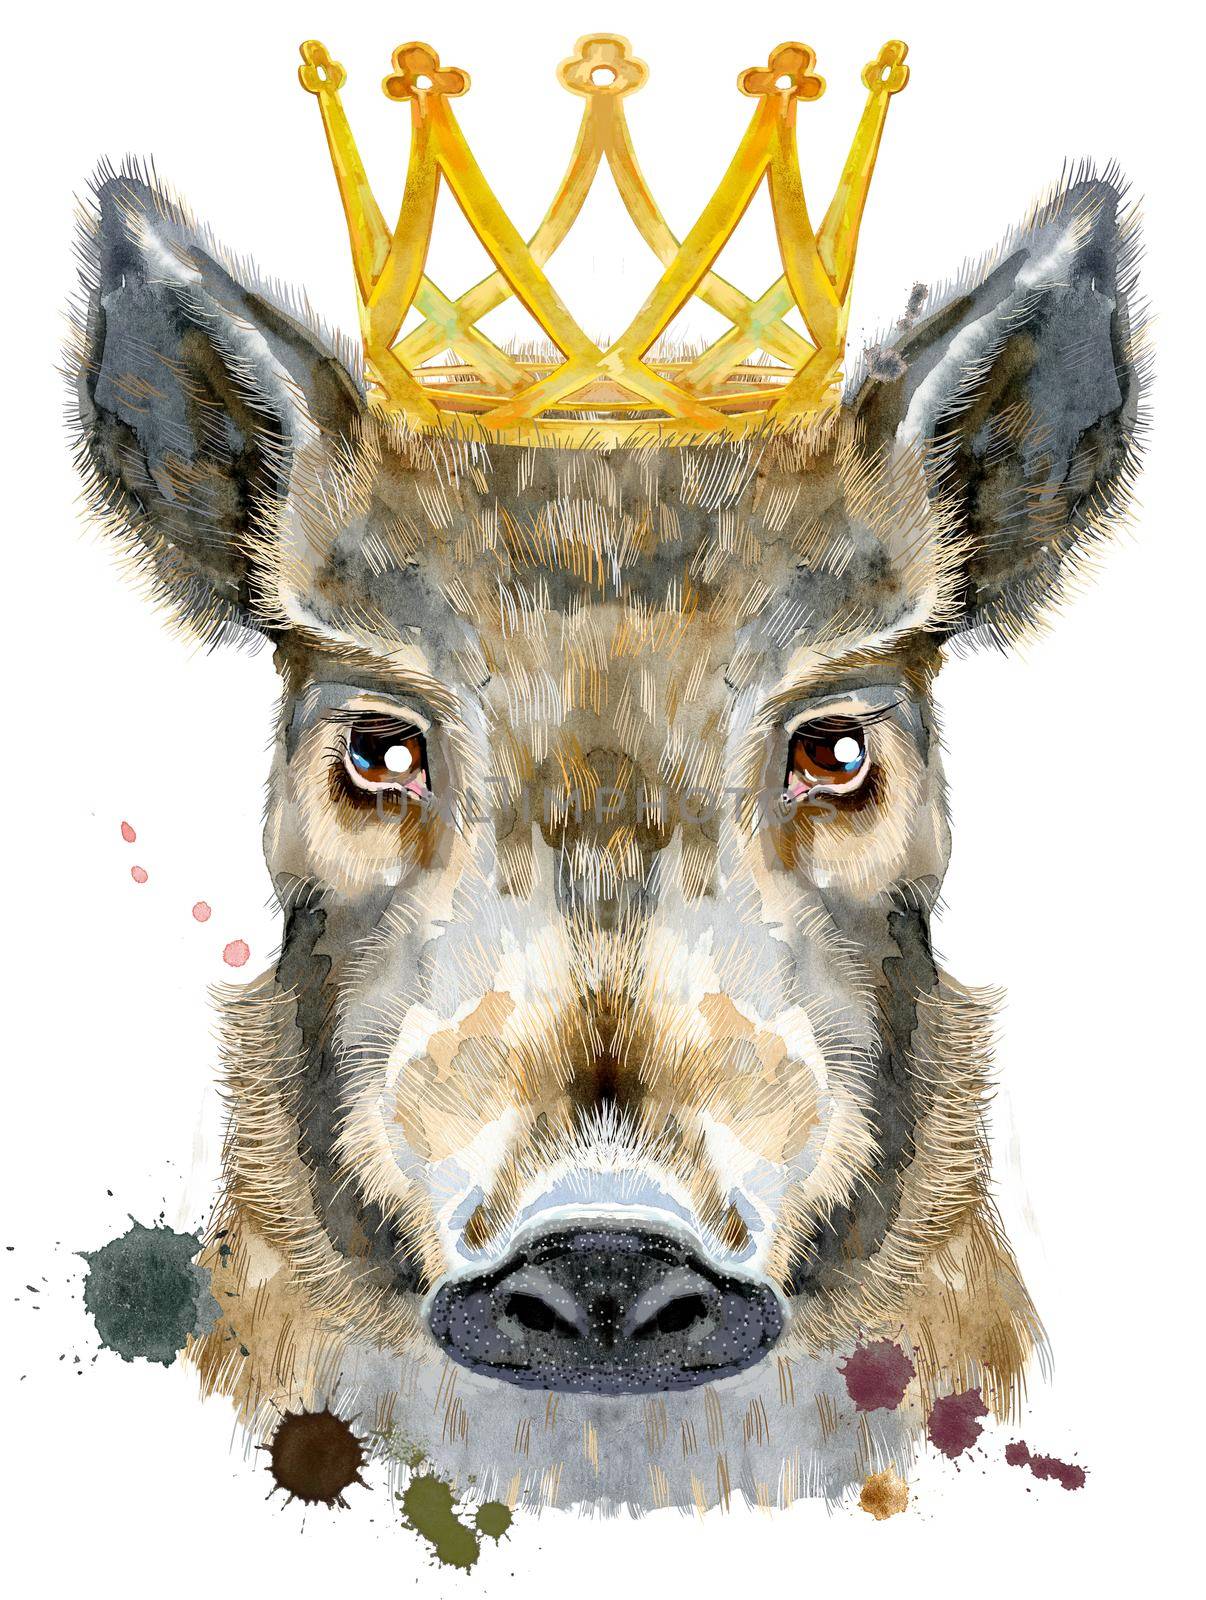 Watercolor portrait of wild boar with golden crown by NataOmsk